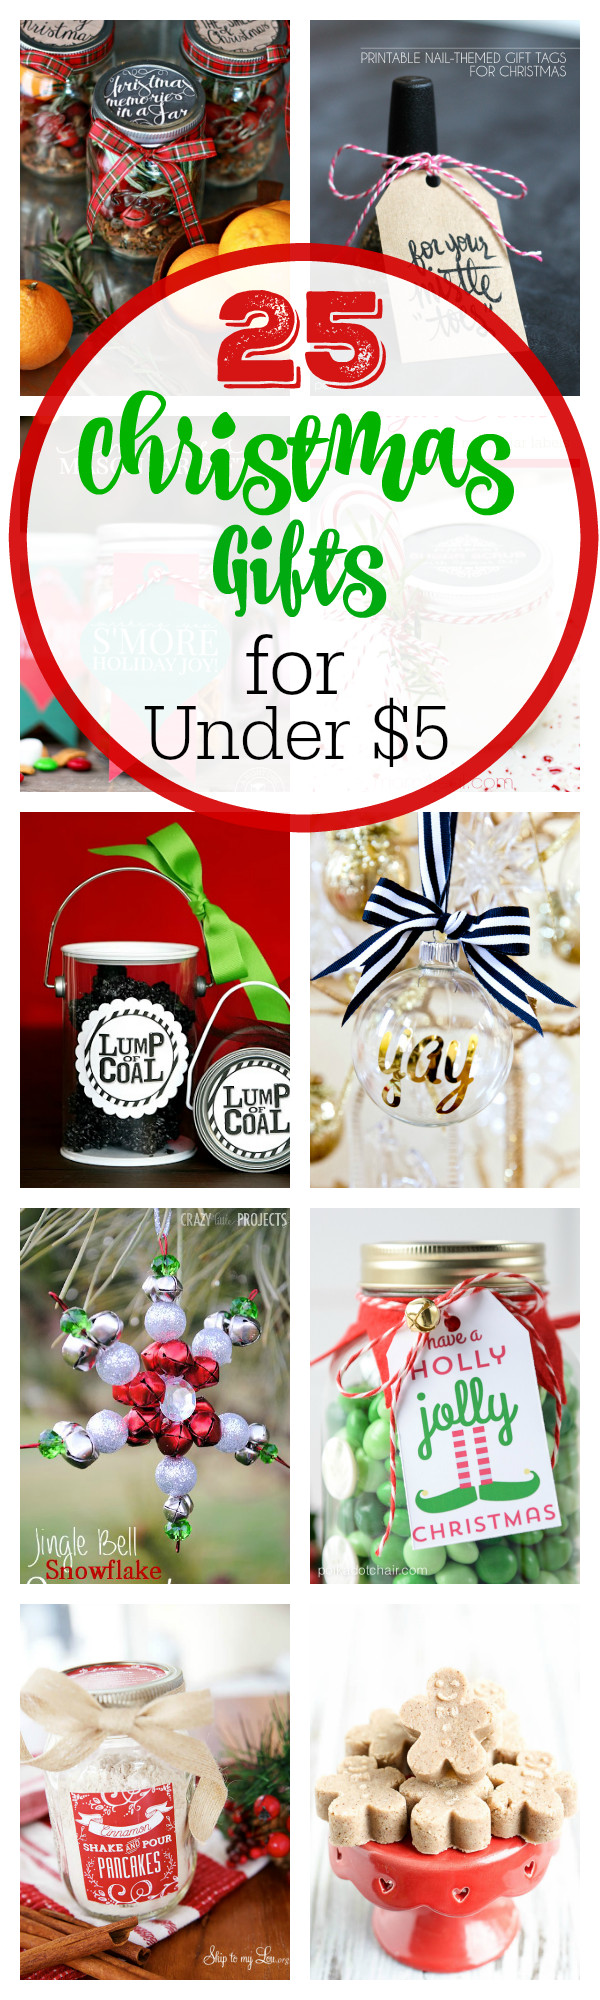 Christmas Gift Ideas Under $5
 25 Christmas Gifts for Under $5 Crazy Little Projects